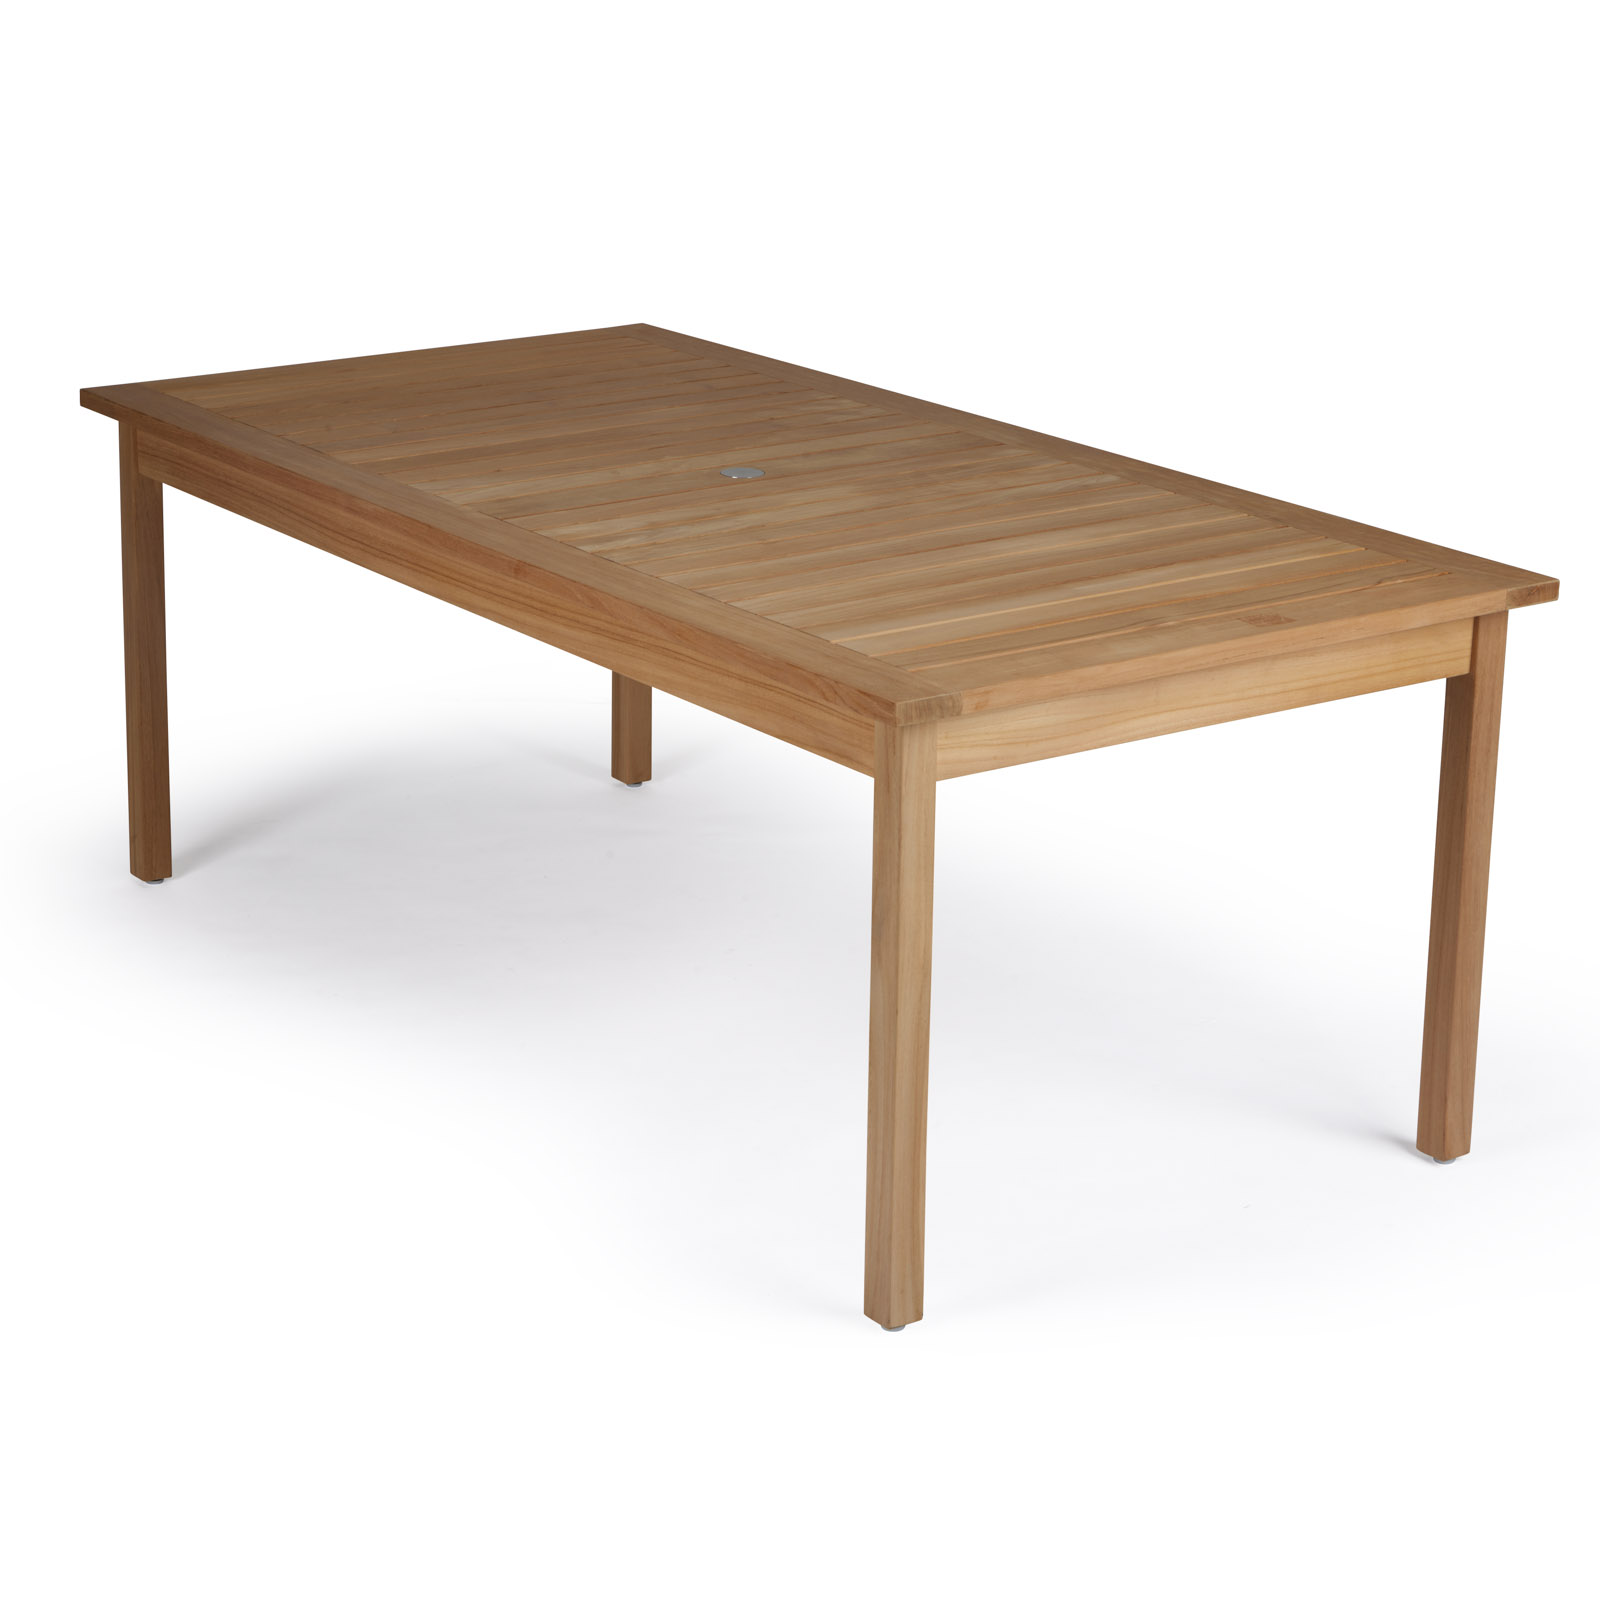 Garden square table 90x90 / outside in Steel - Collection Nova